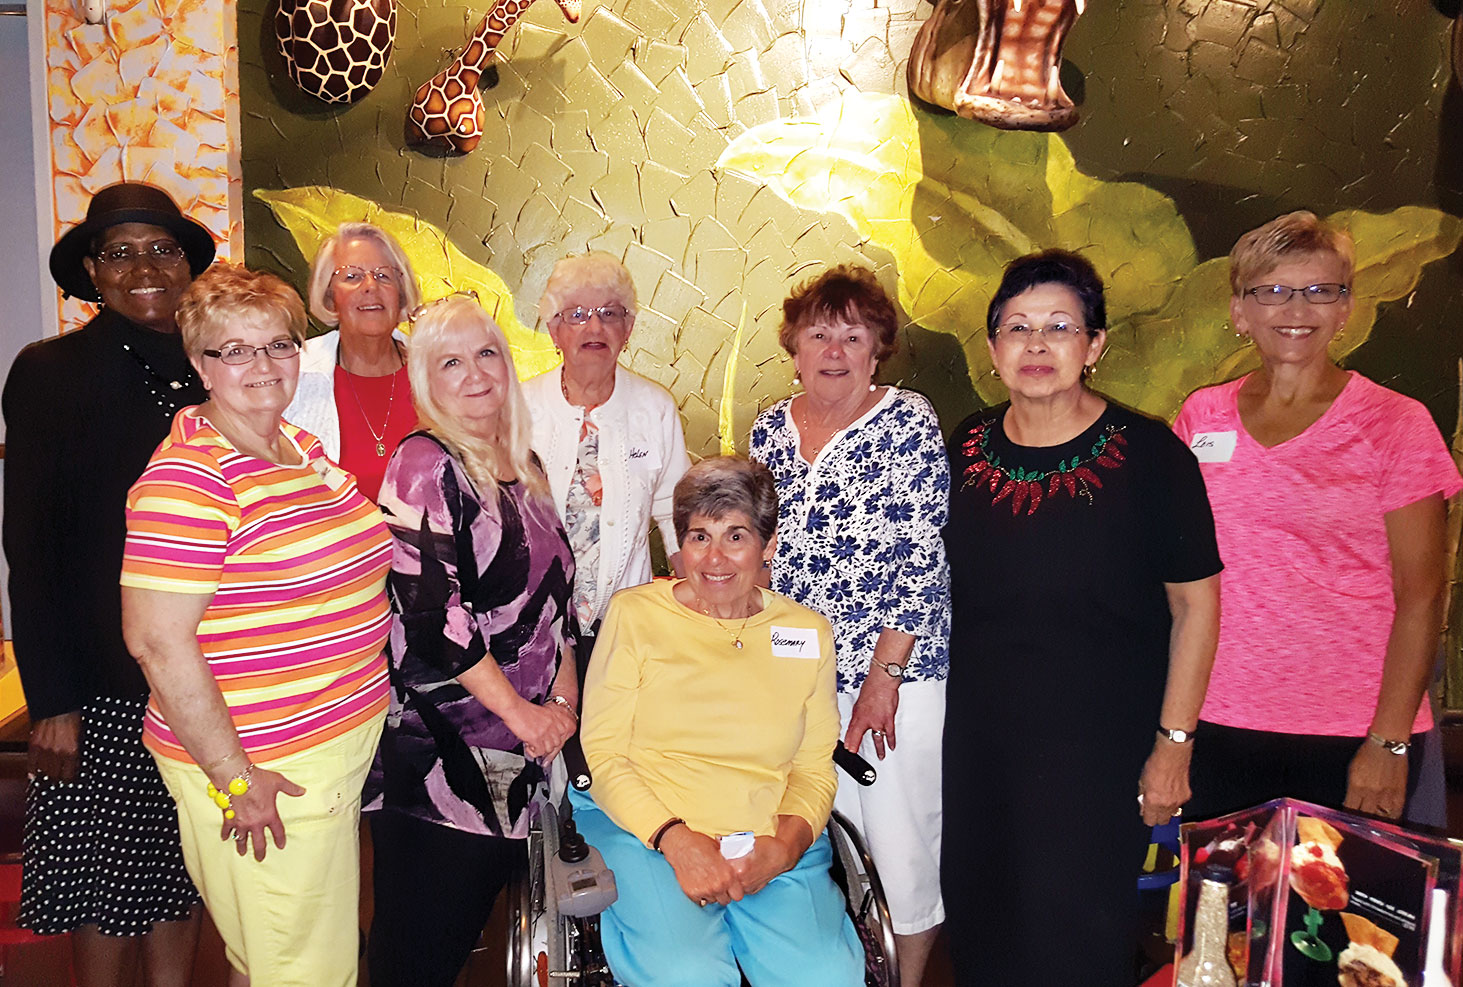 Left to right, back row: Claudine Zielinski, Elaine Yielding and Helen Abraham; front: Shawnee Robison, Gail Montgomery, Rosemary DeAngelo, Jackie Rice, Yolanda Laborin and Lois Hanson. Photo by our waitress Leticia.